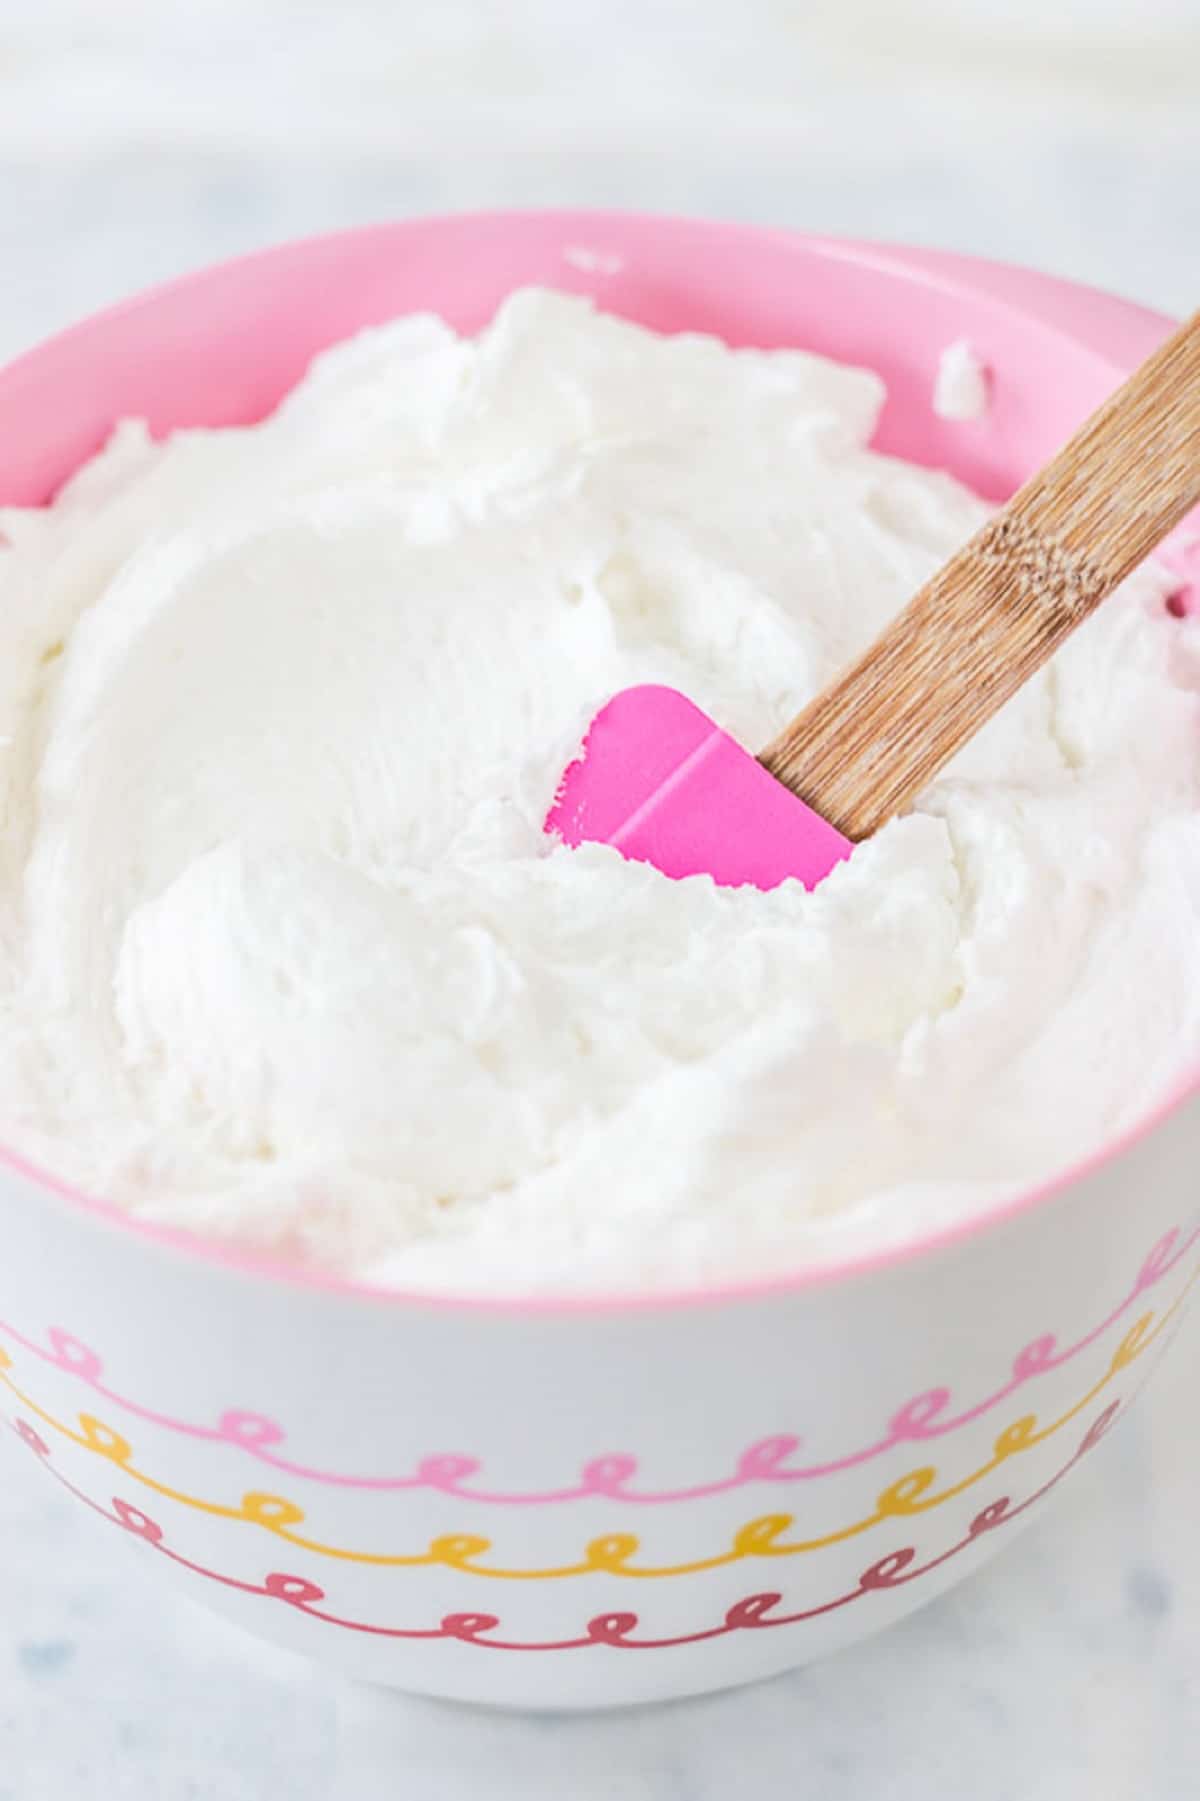 White icing in a pink bowl.